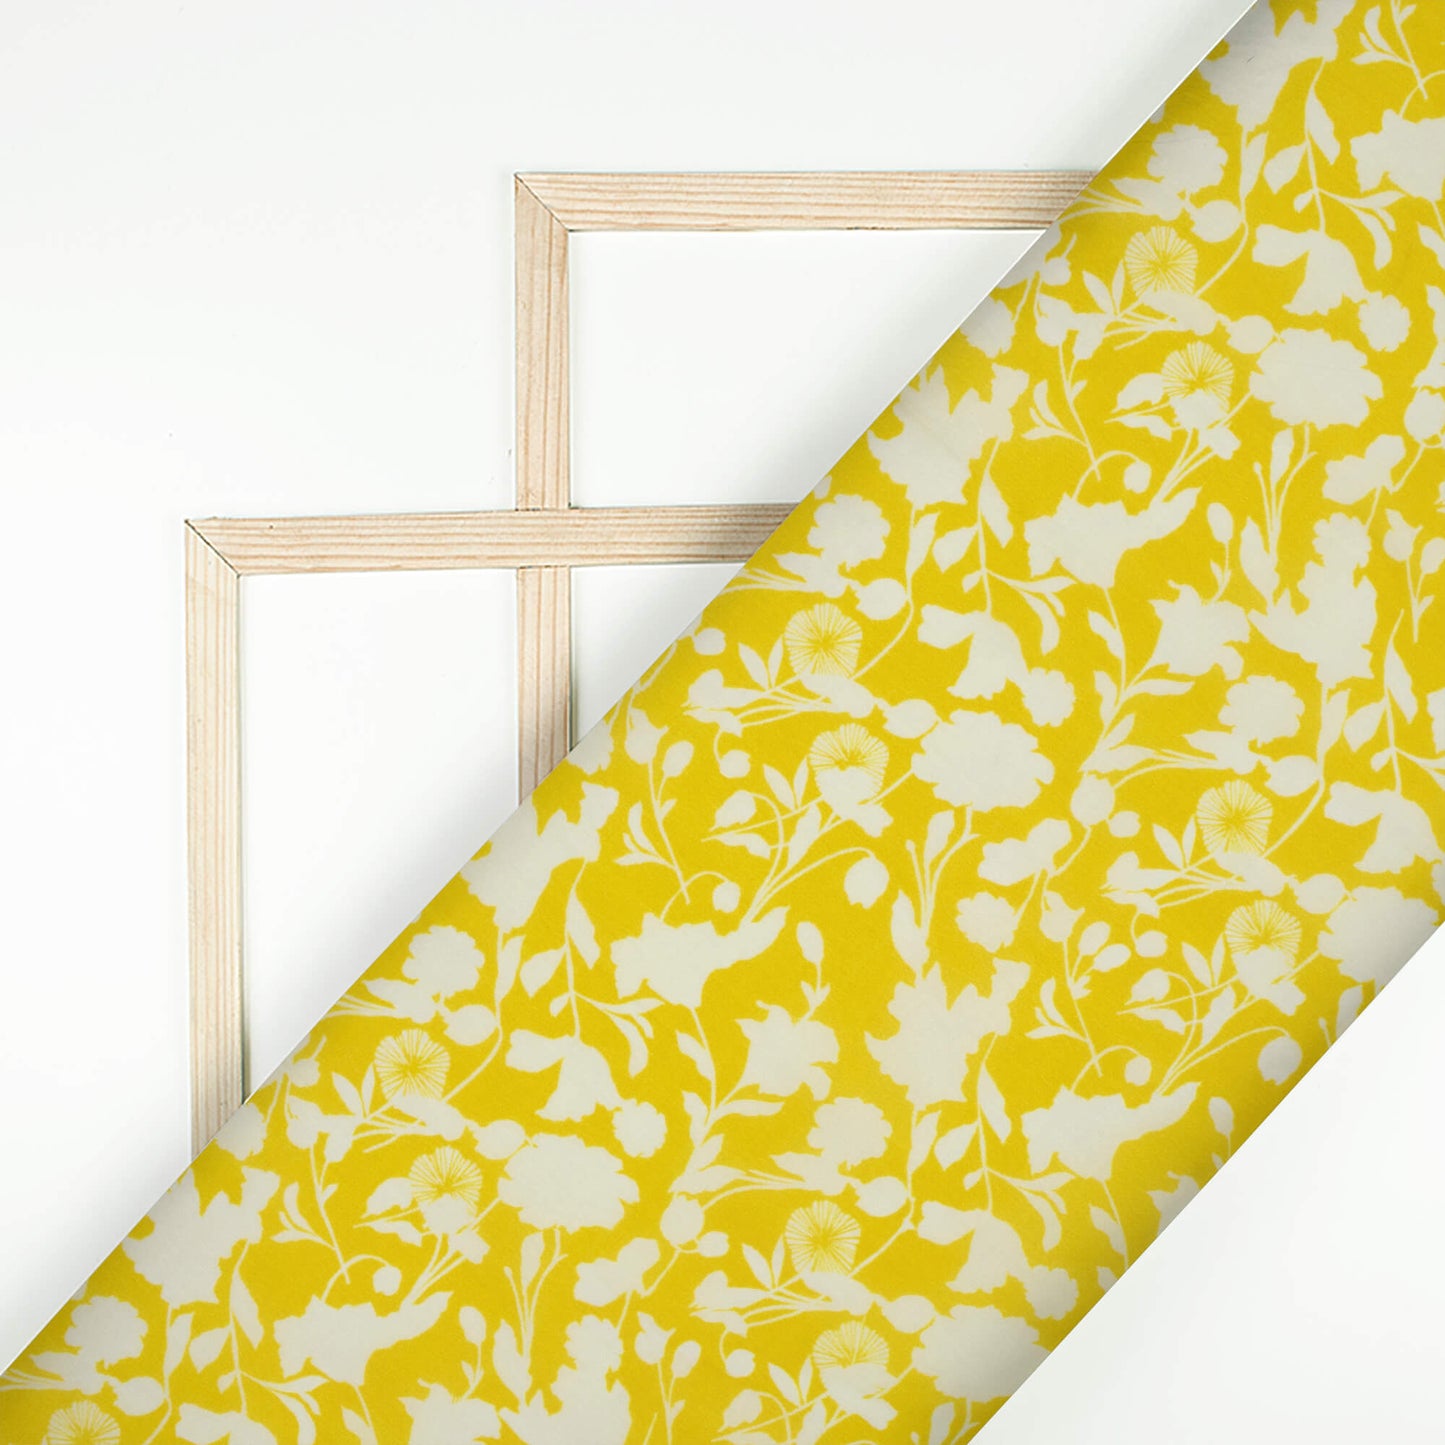 Bumblebee Yellow And White Floral Pattern Digital Print Viscose Natural Crepe Fabric